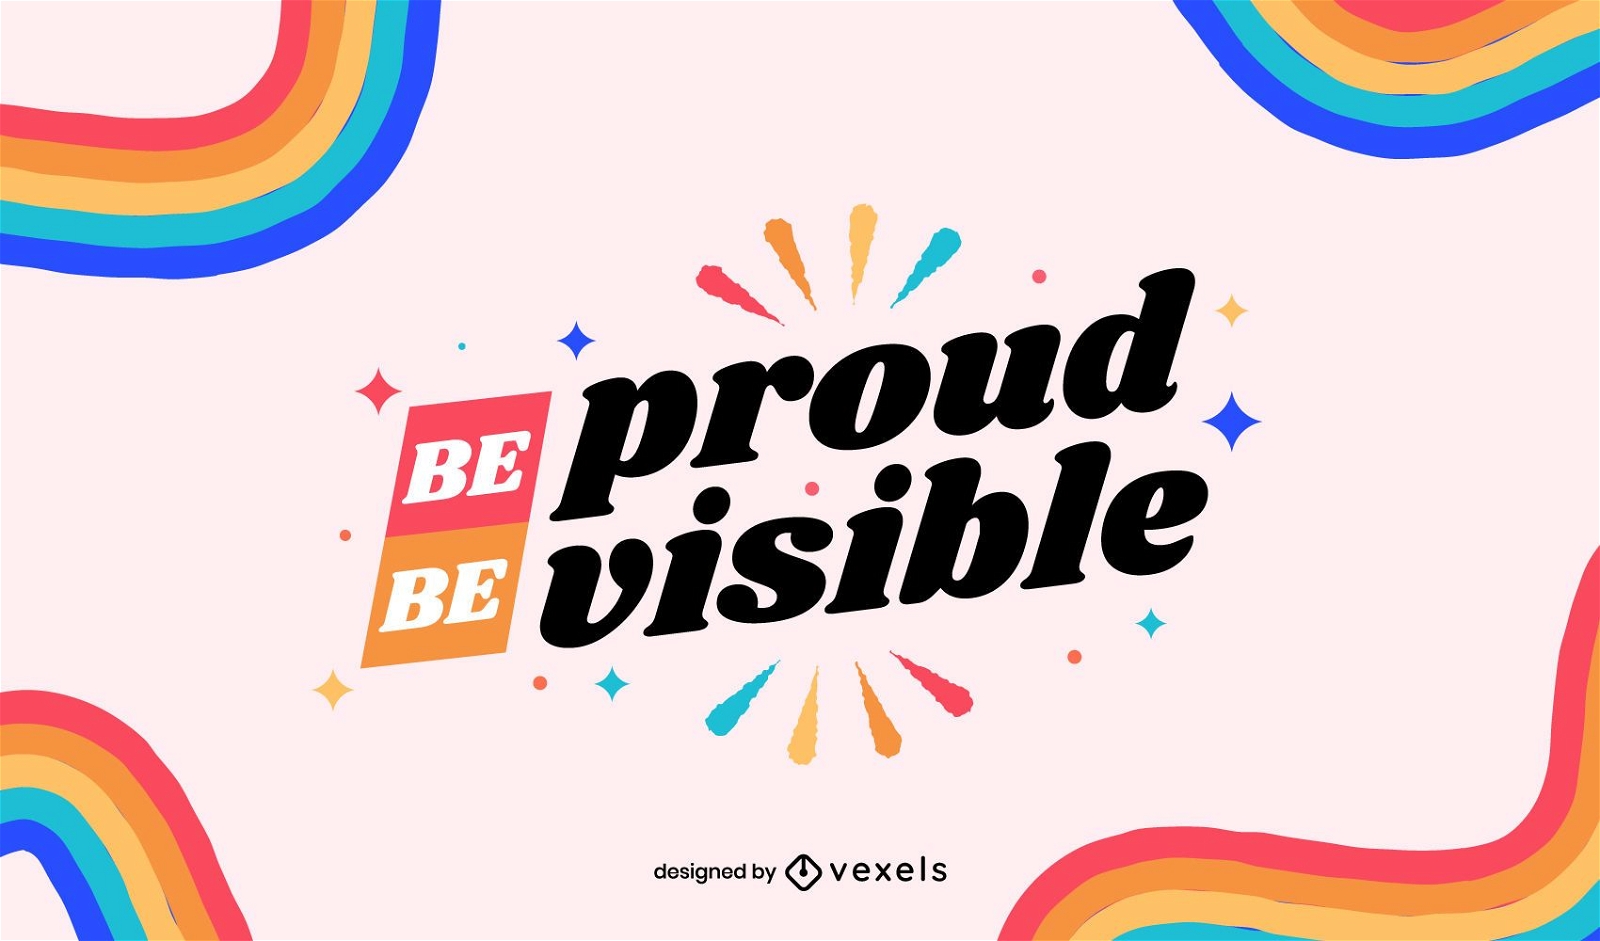 Be proud be visible lettering